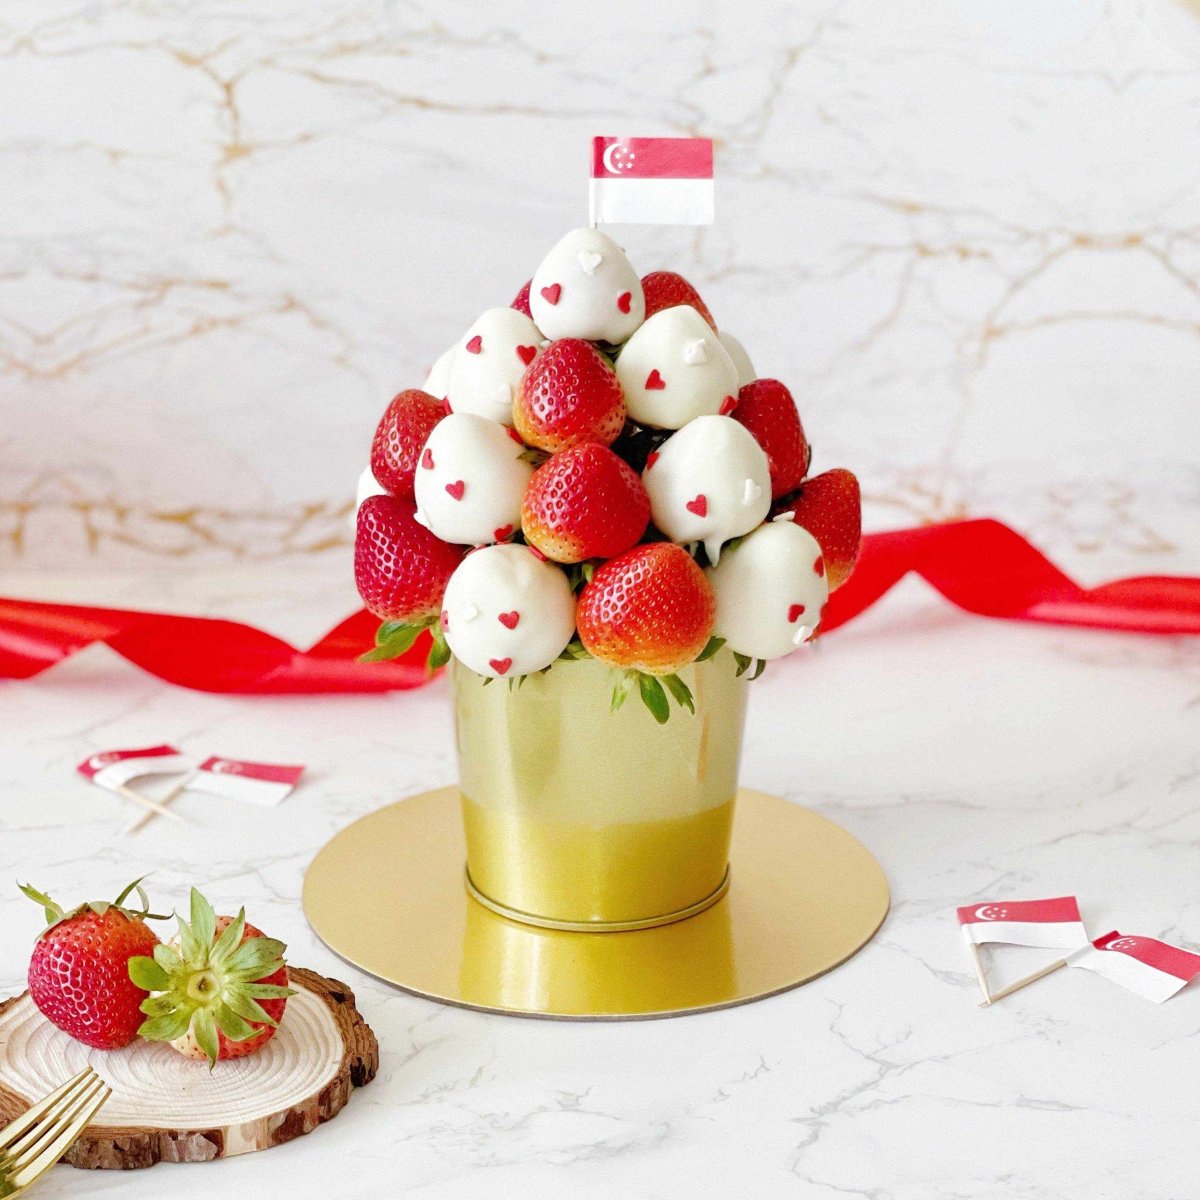 Red & White | Singapore National Day Theme Fruit Hamper Dessert | Fresh Fruit Arrangement Pot with Chocolate Coated Strawberries - Rainbowly Fresh Fruit Gift and Flower Arrangments